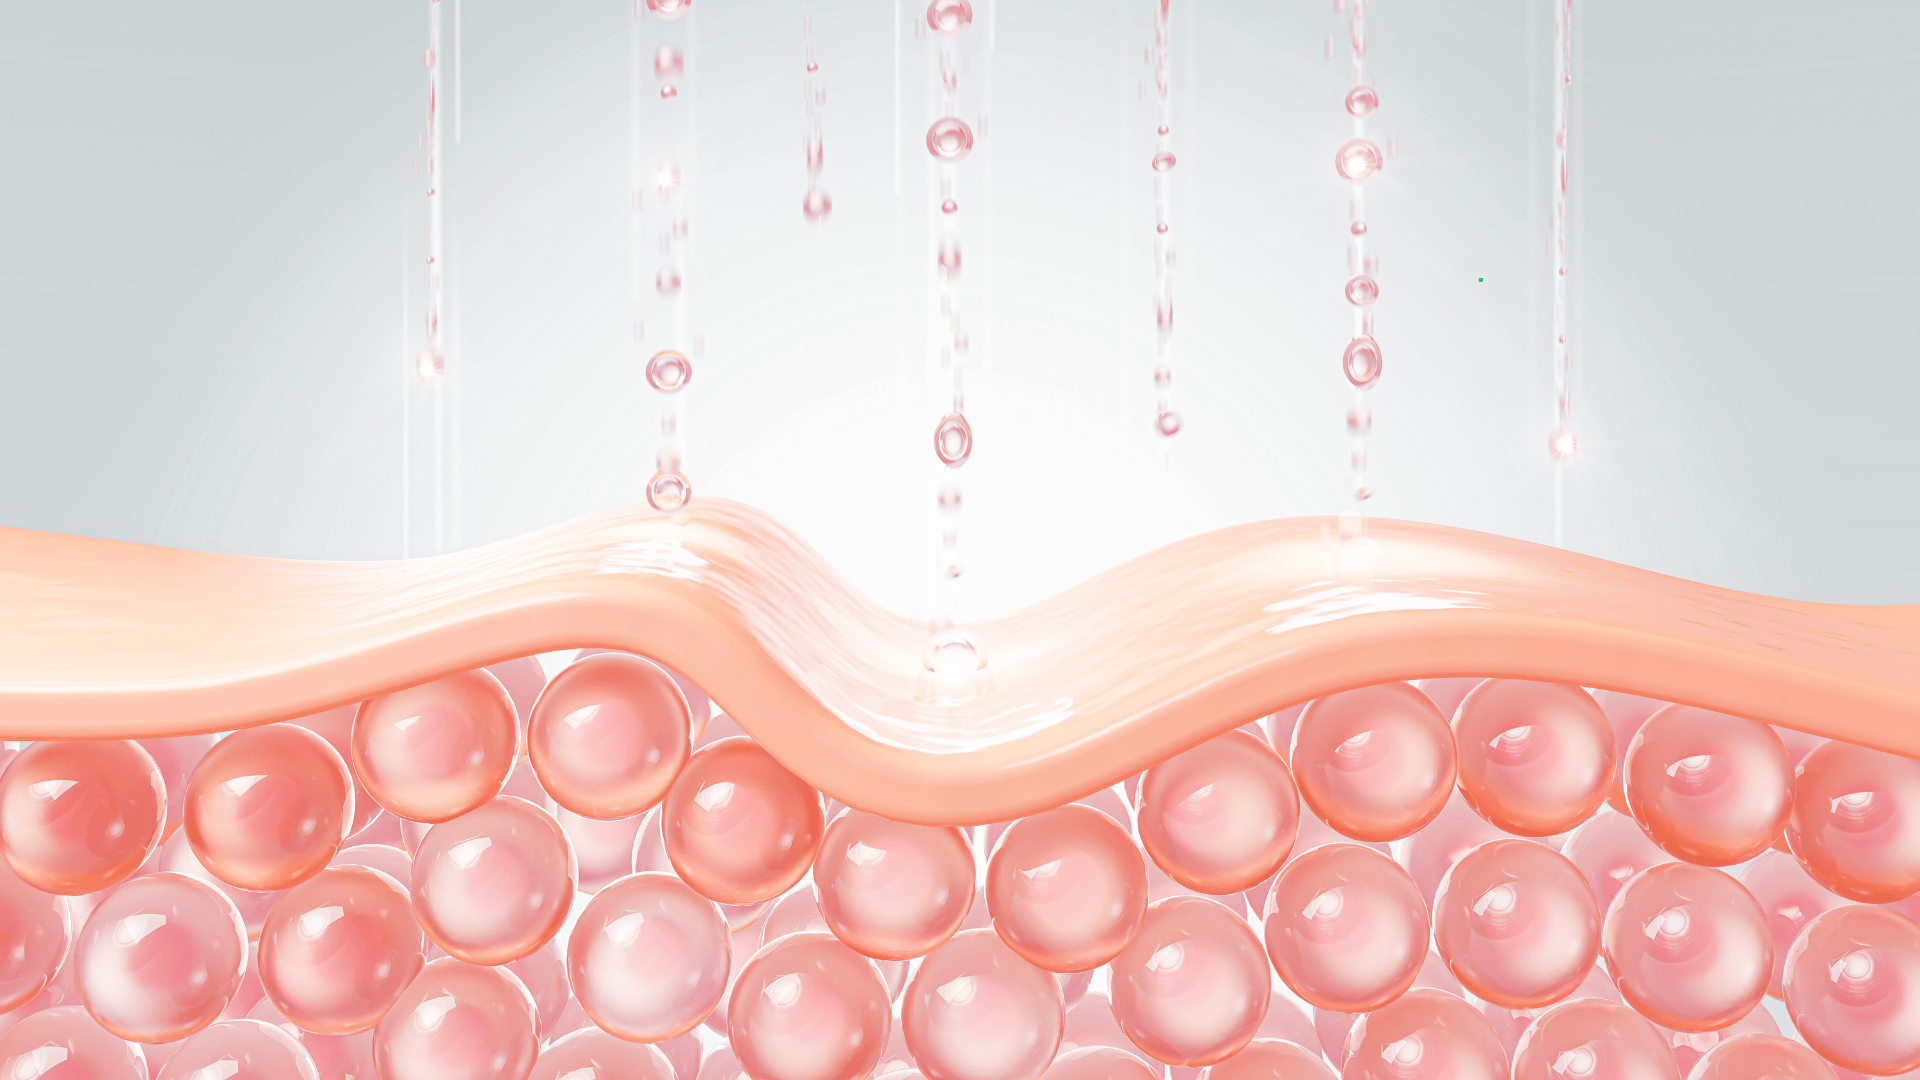 Digital illustration of a cross-section of skin tissue. The upper layer of the skin is depicted with a wavy contour, beneath which a layer of round, pink cells resembling the dermis is visible. Droplets of moisture are shown descending onto the skin's surface, suggesting hydration or skincare treatment.